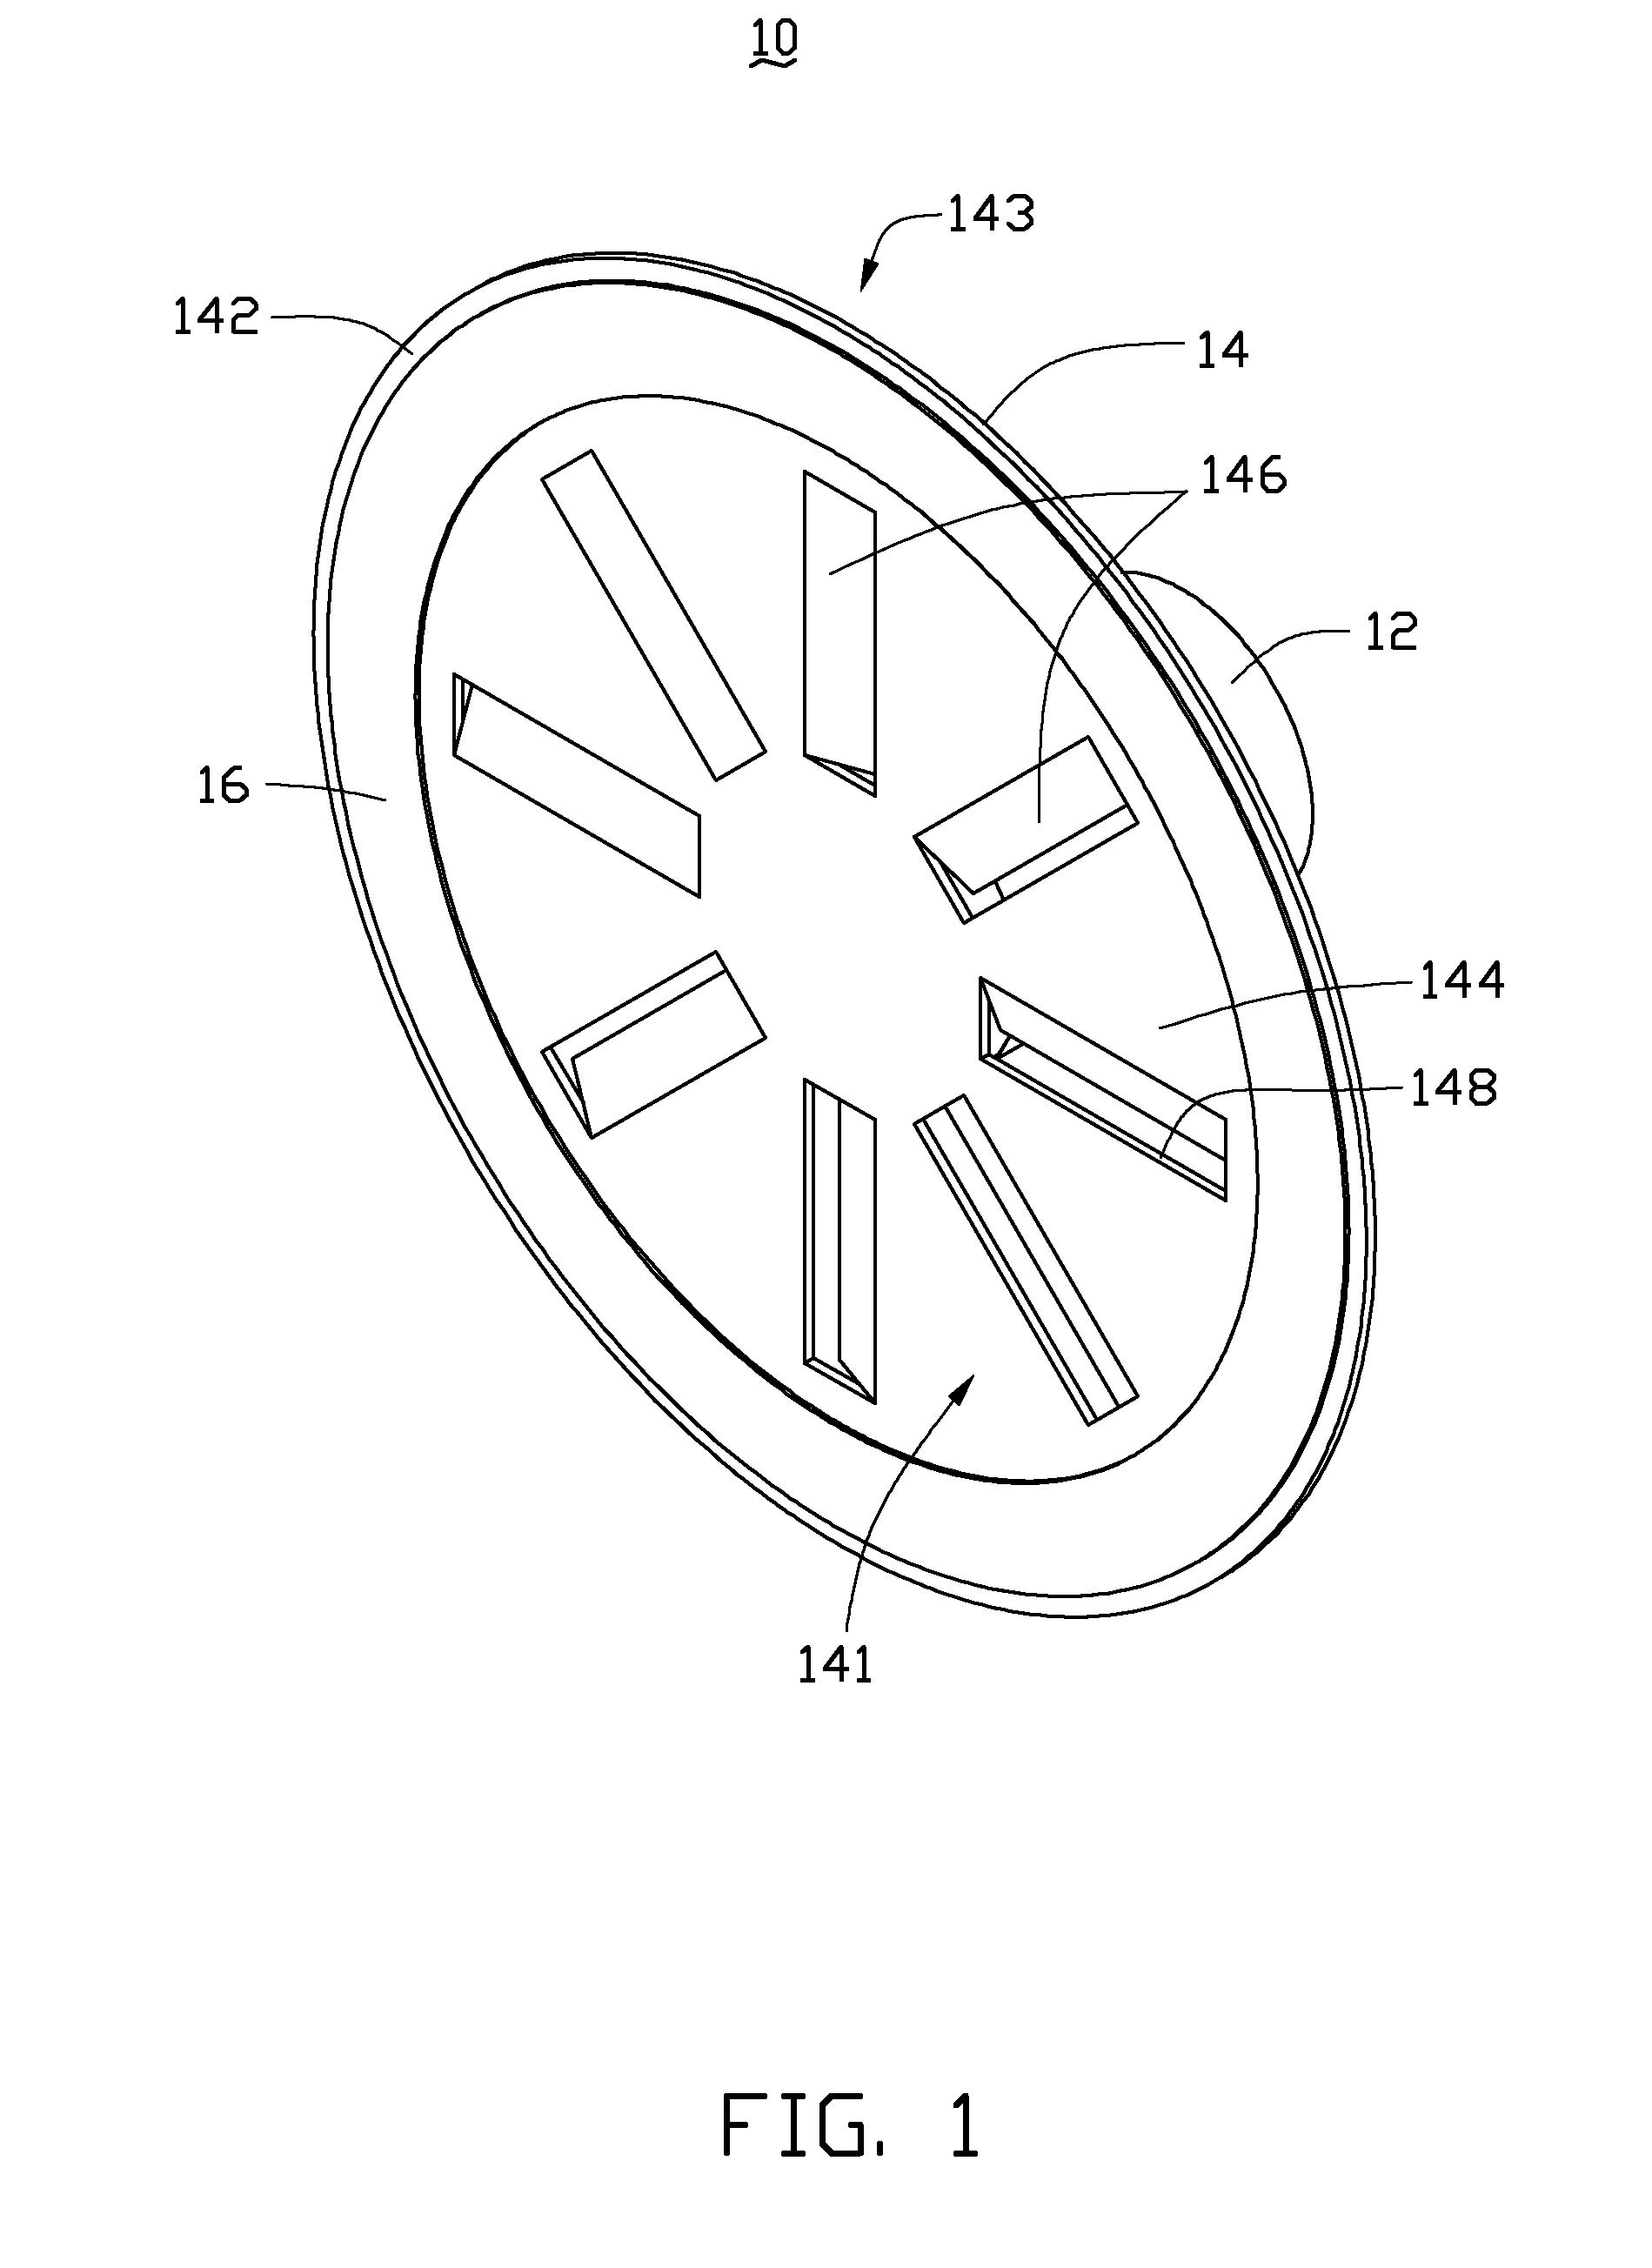 Color wheel with fan blade